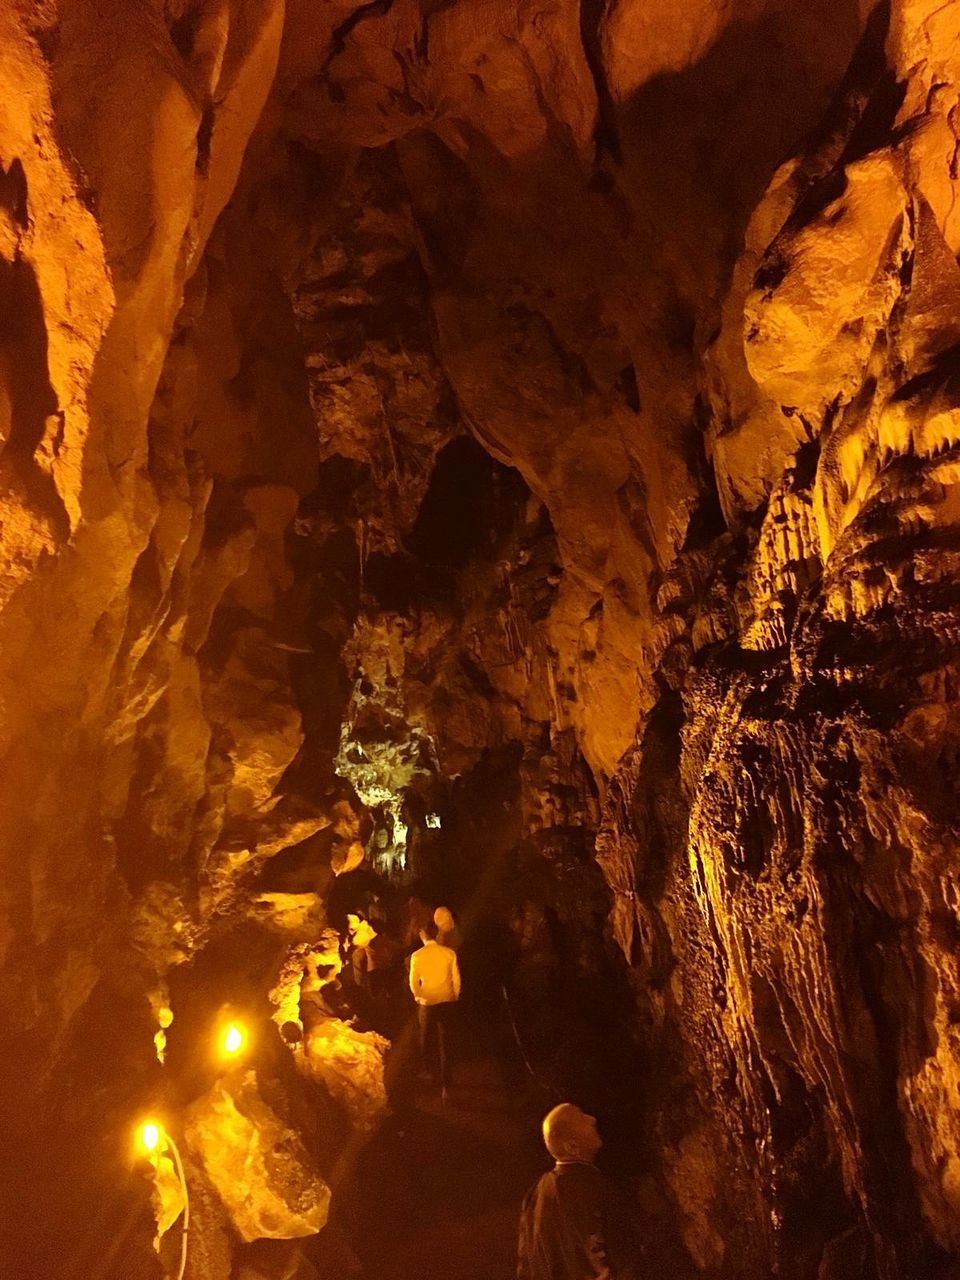 rock formation, cave, solid, rock, rock - object, geology, physical geography, nature, no people, illuminated, outdoors, beauty in nature, travel destinations, stalactite, fire, rough, fire - natural phenomenon, eroded